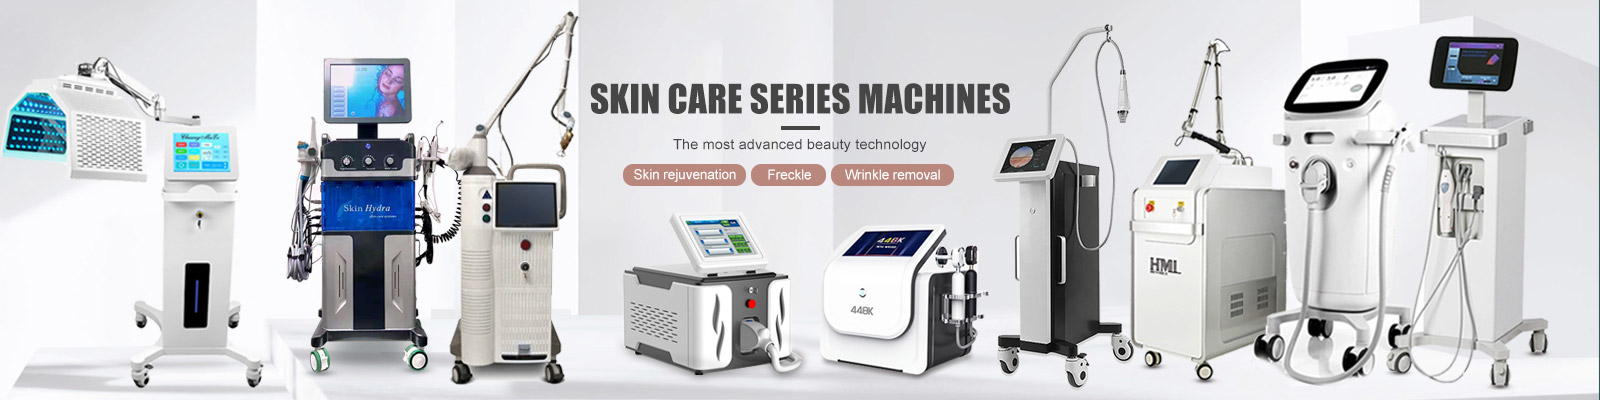 Diode Laser Hair Removal Machine, Triple Wavelength Laser Hair Removal, IPL Hair Removal Machine, Vacuum Roller Slimming Machine, Picosecond Laser Machine, Cryolipolysis Machine, Microneedling Machine, Microdermabrasion Machine, Radio Frequency Equipments, Anti Wrinkle Machines, PDT Machines, CO2 Fractional Laser Machine, Oxygen Jet Machine, HIFU Machine, Promotion - Weifang Evamed Technology Co.,Ltd